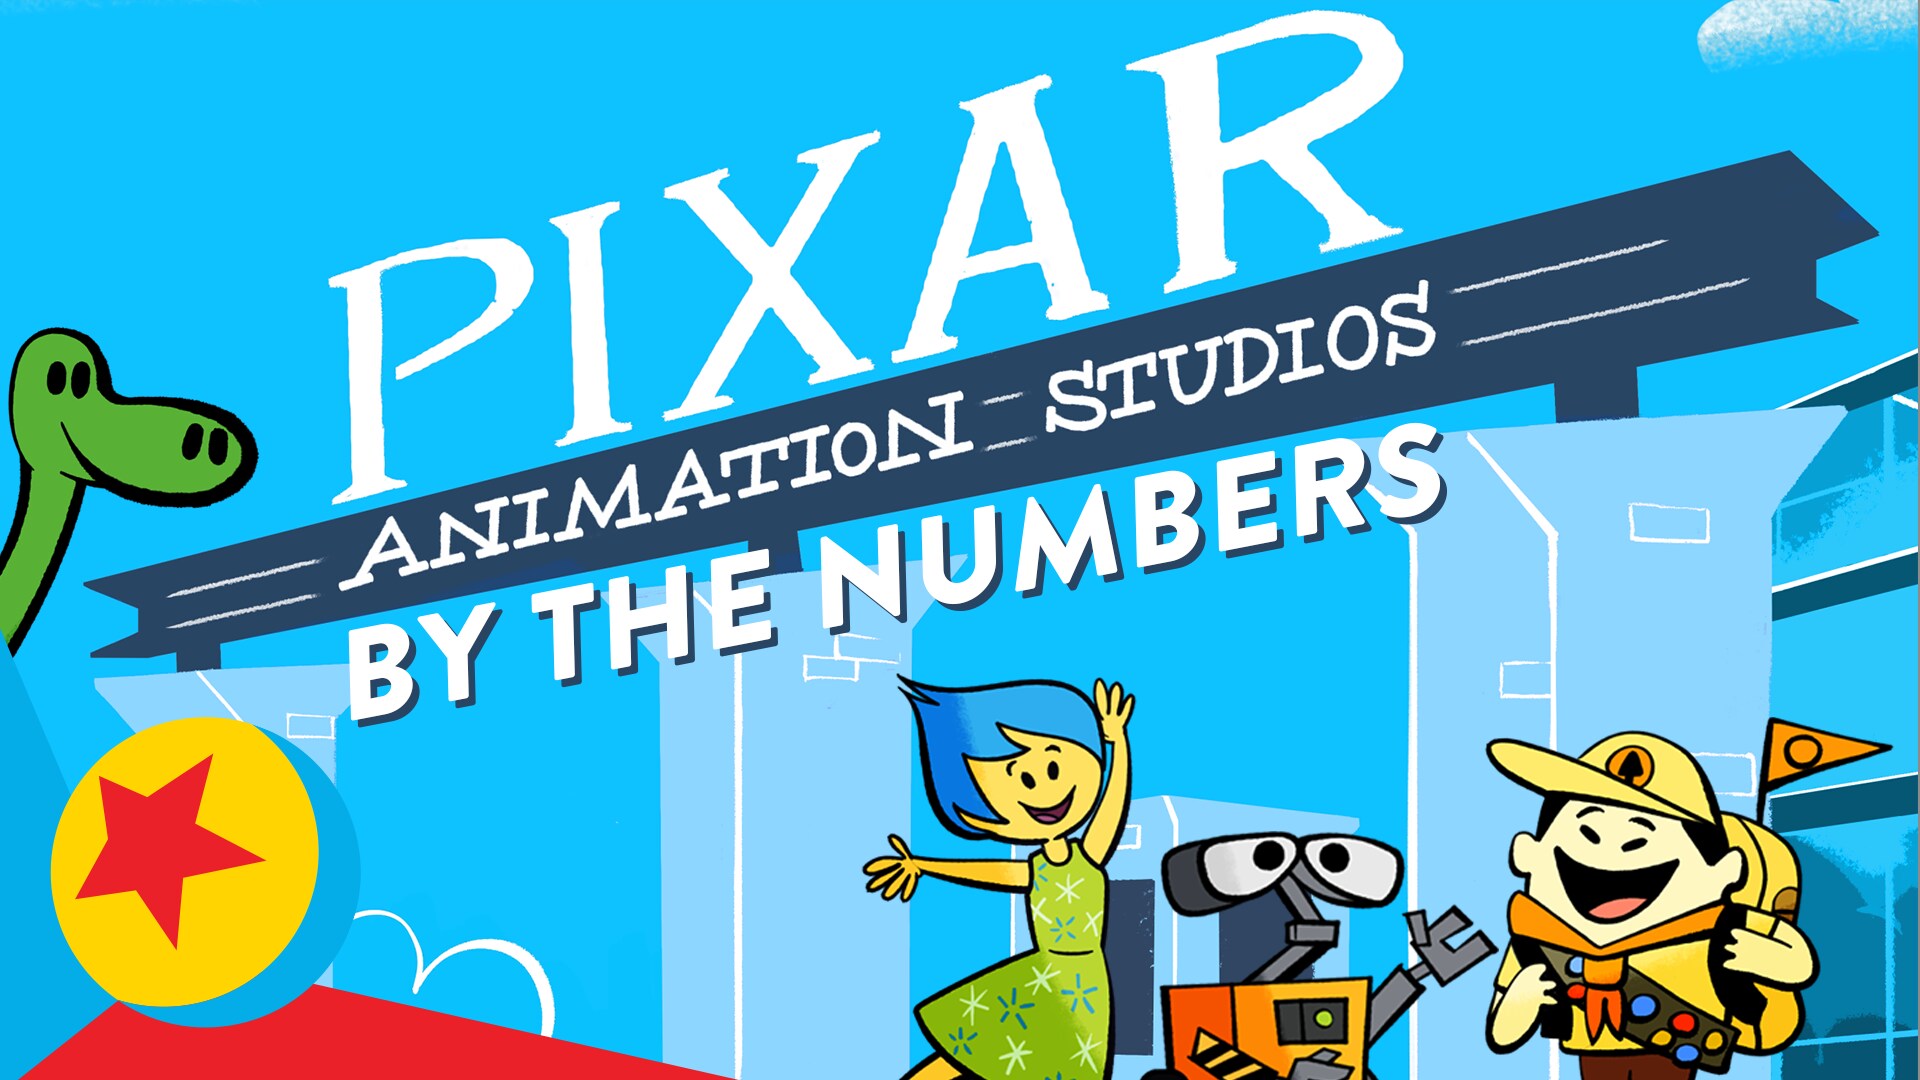 Count Down Some Fun Facts About the Pixar Campus | Pixar By The Numbers